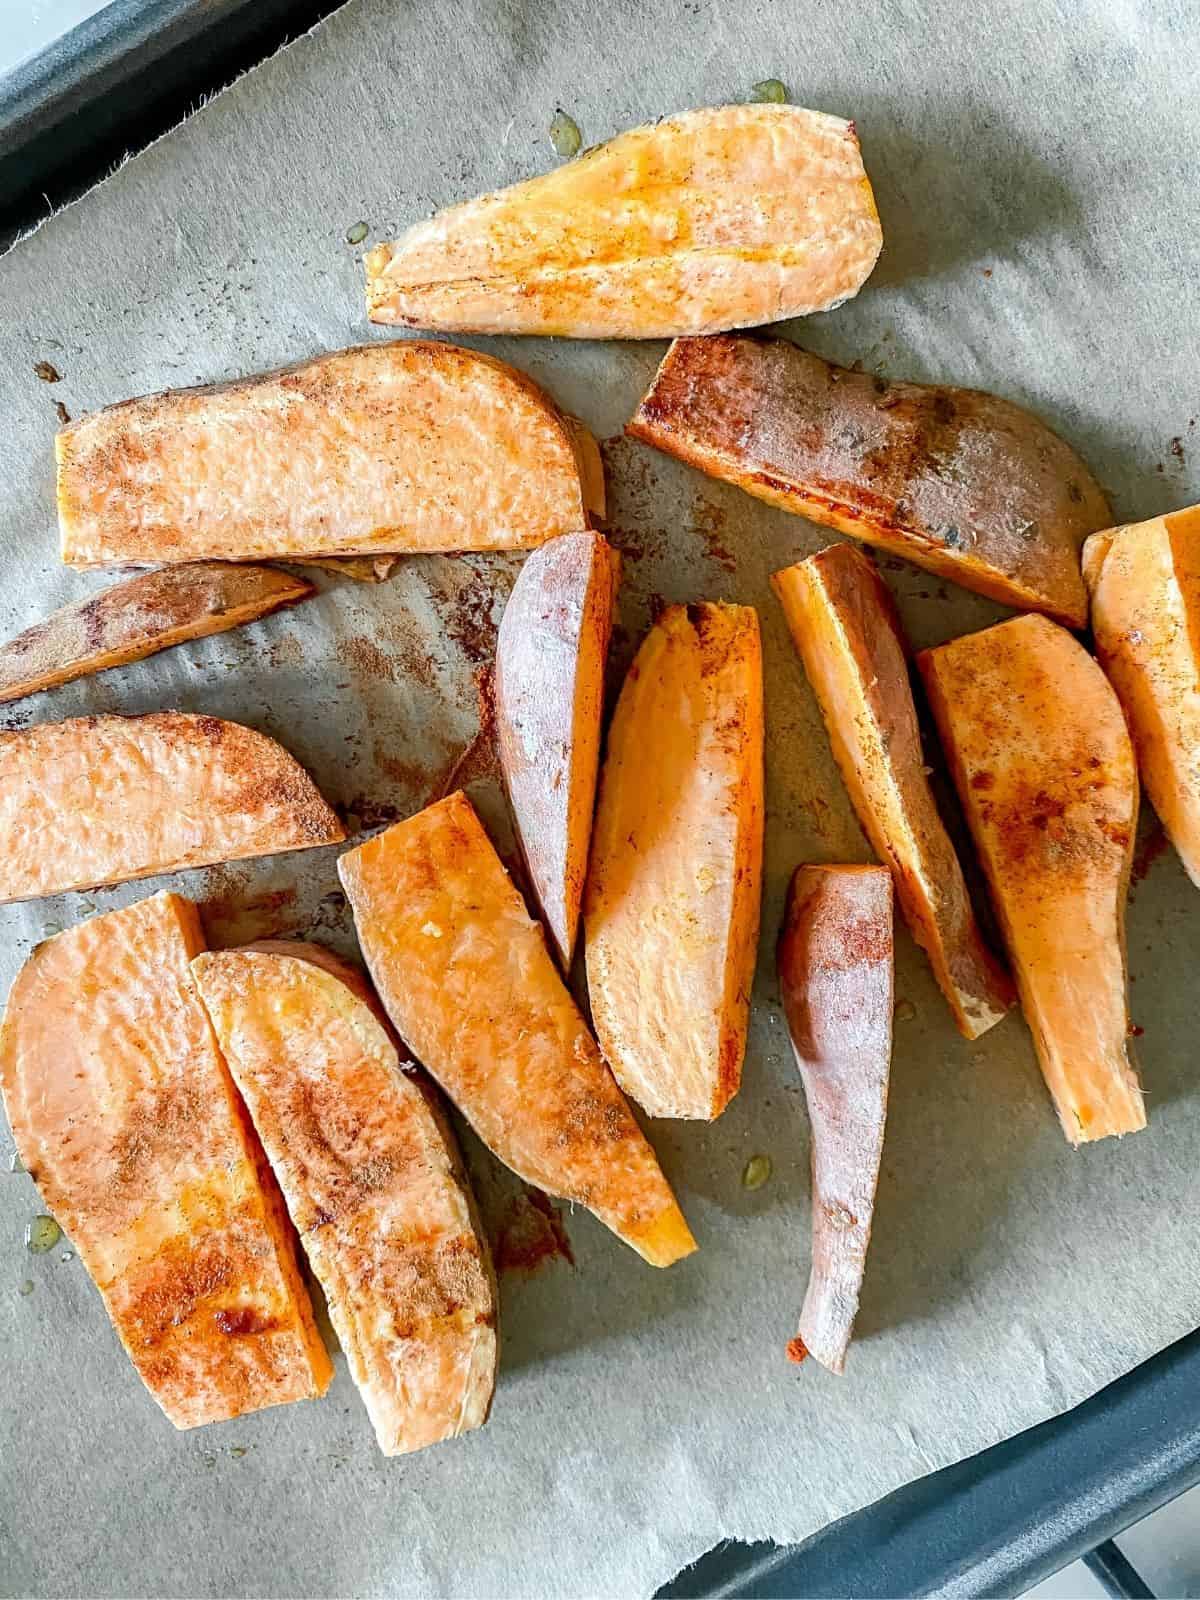 uncooked sweet potato wedges on a baking tray.